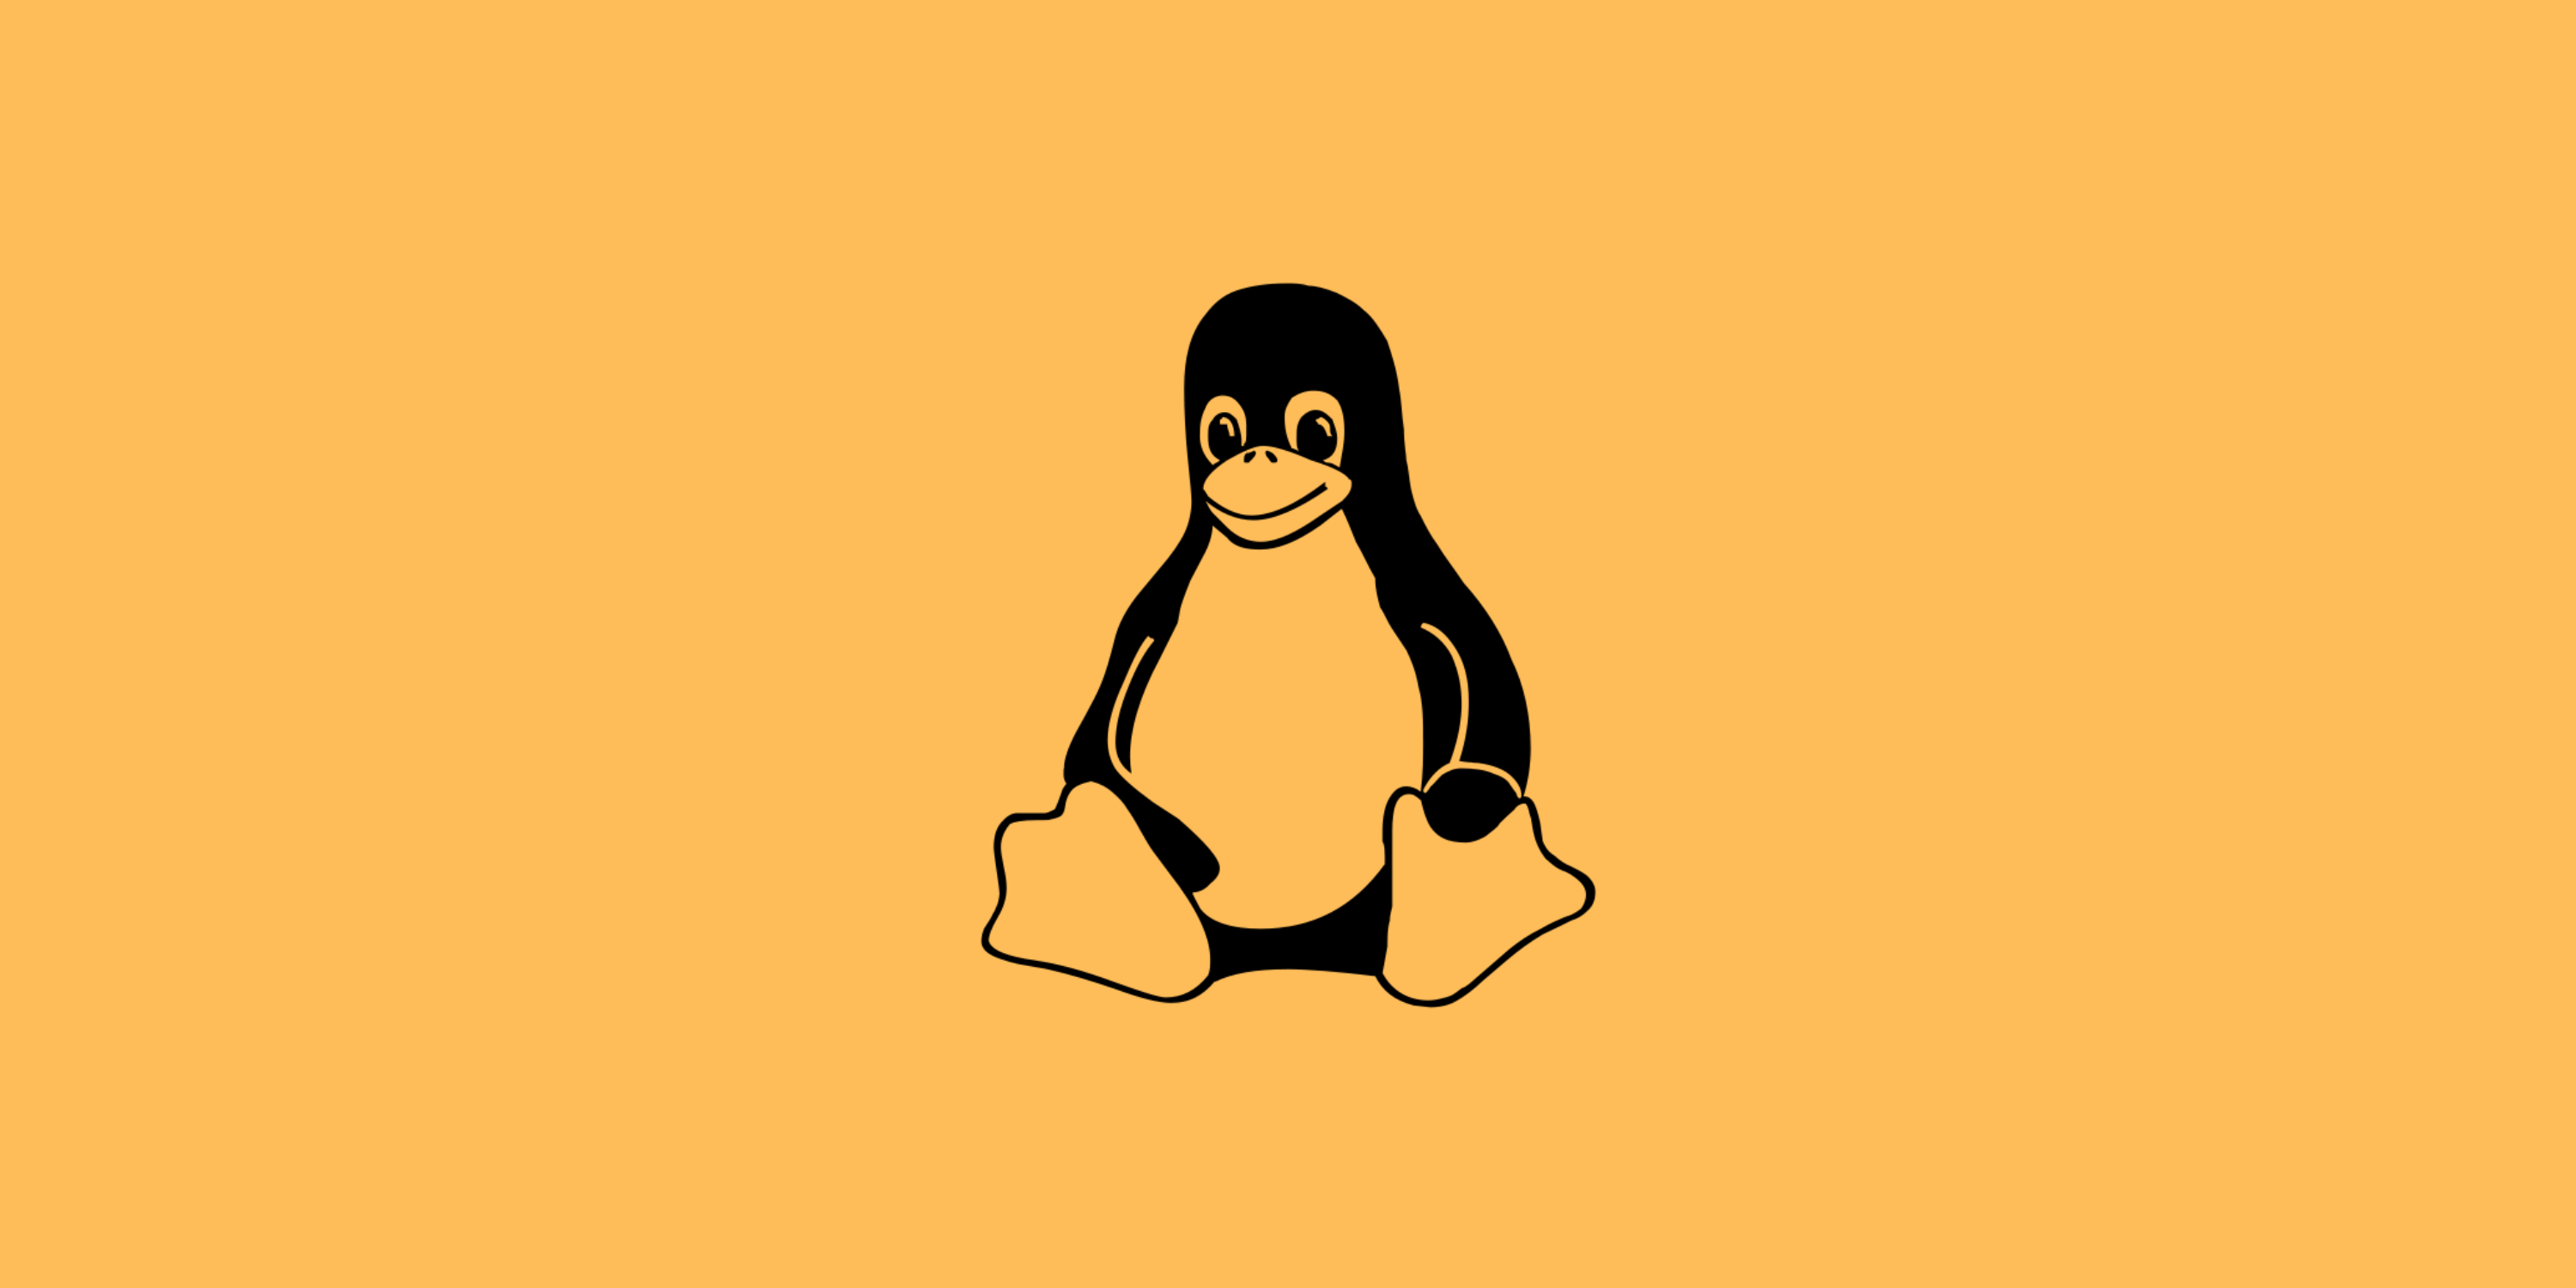 what is man command in linux?